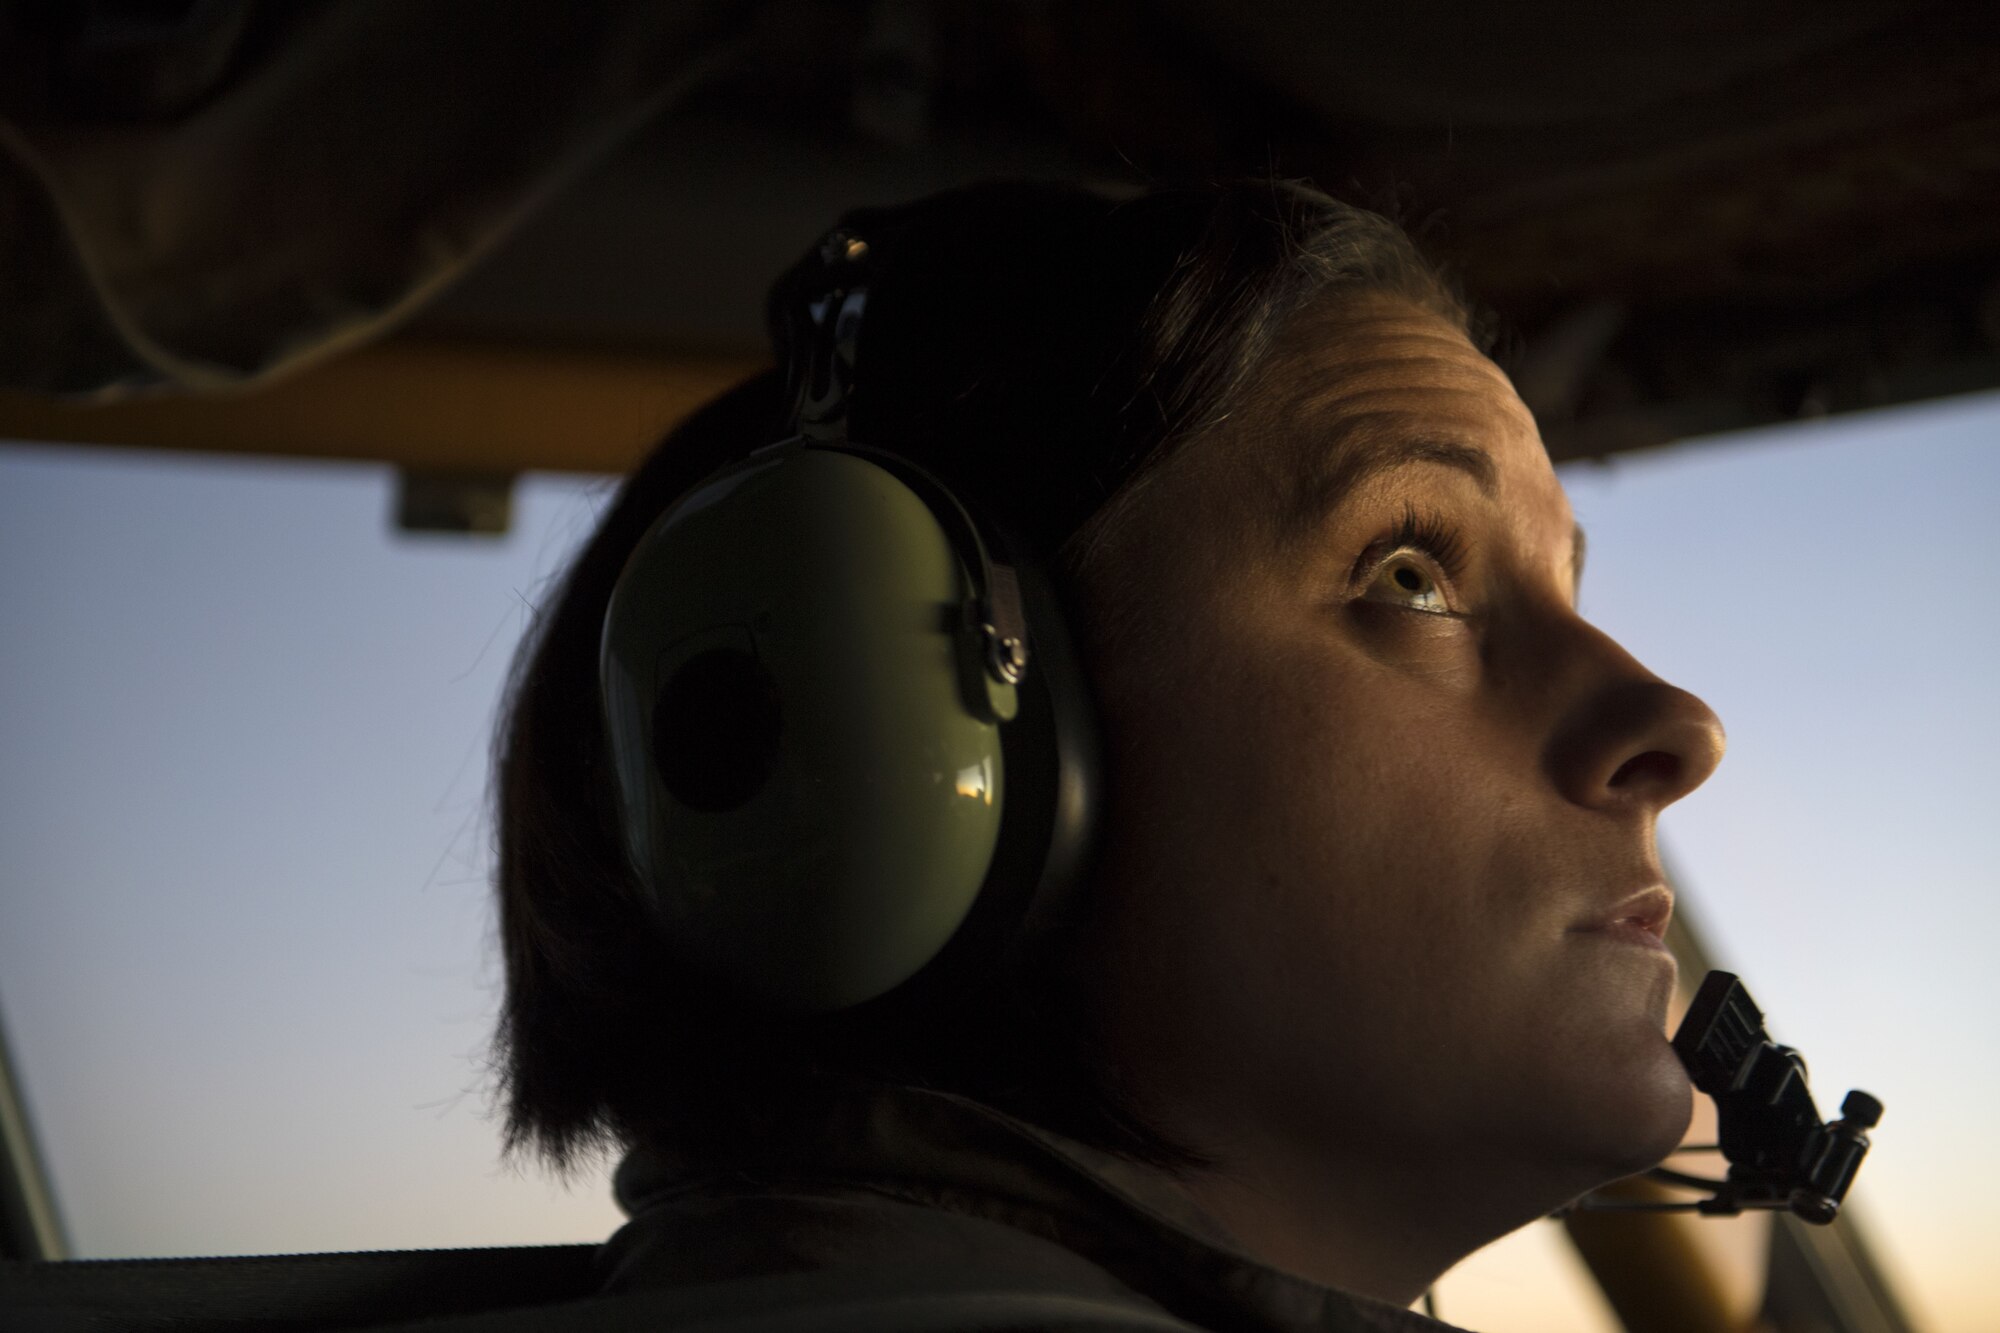 U.S. Air Force Maj. Kirsten Ellis, a Pilot assigned to 447th Air Expeditionary Group, inspects aircraft instruments on board a KC-135 Stratotanker during a refueling mission over Syria Dec. 1, 2017. The 447th AEG supports Operation Inherent Resolve by conducting refueling, close air support missions with KC-135 Stratotankers and A-10 Thunderbolt IIs along with aircraft maintenance located at Incirlik Air Base, Turkey. (U.S. Air Force photo by Staff Sgt. Paul Labbe)